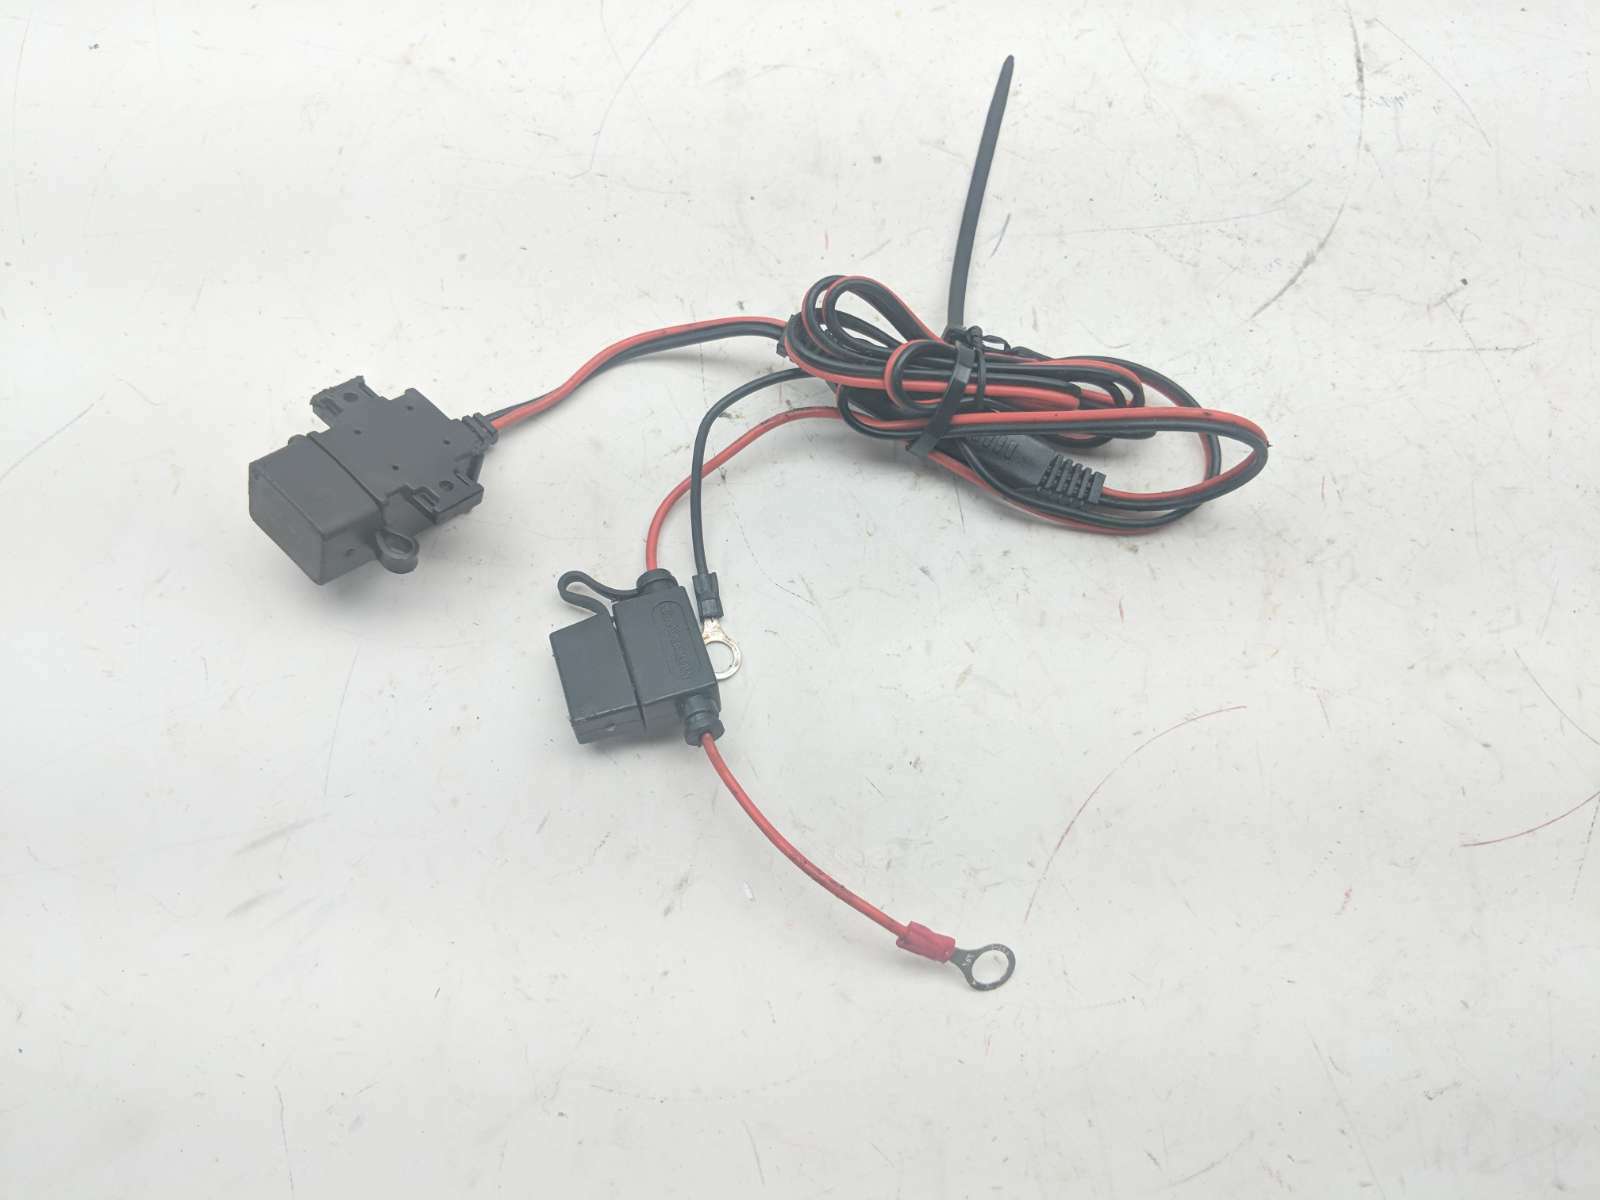 04 Honda Shadow Sabre VT1100 Battery Tender Cable Wire